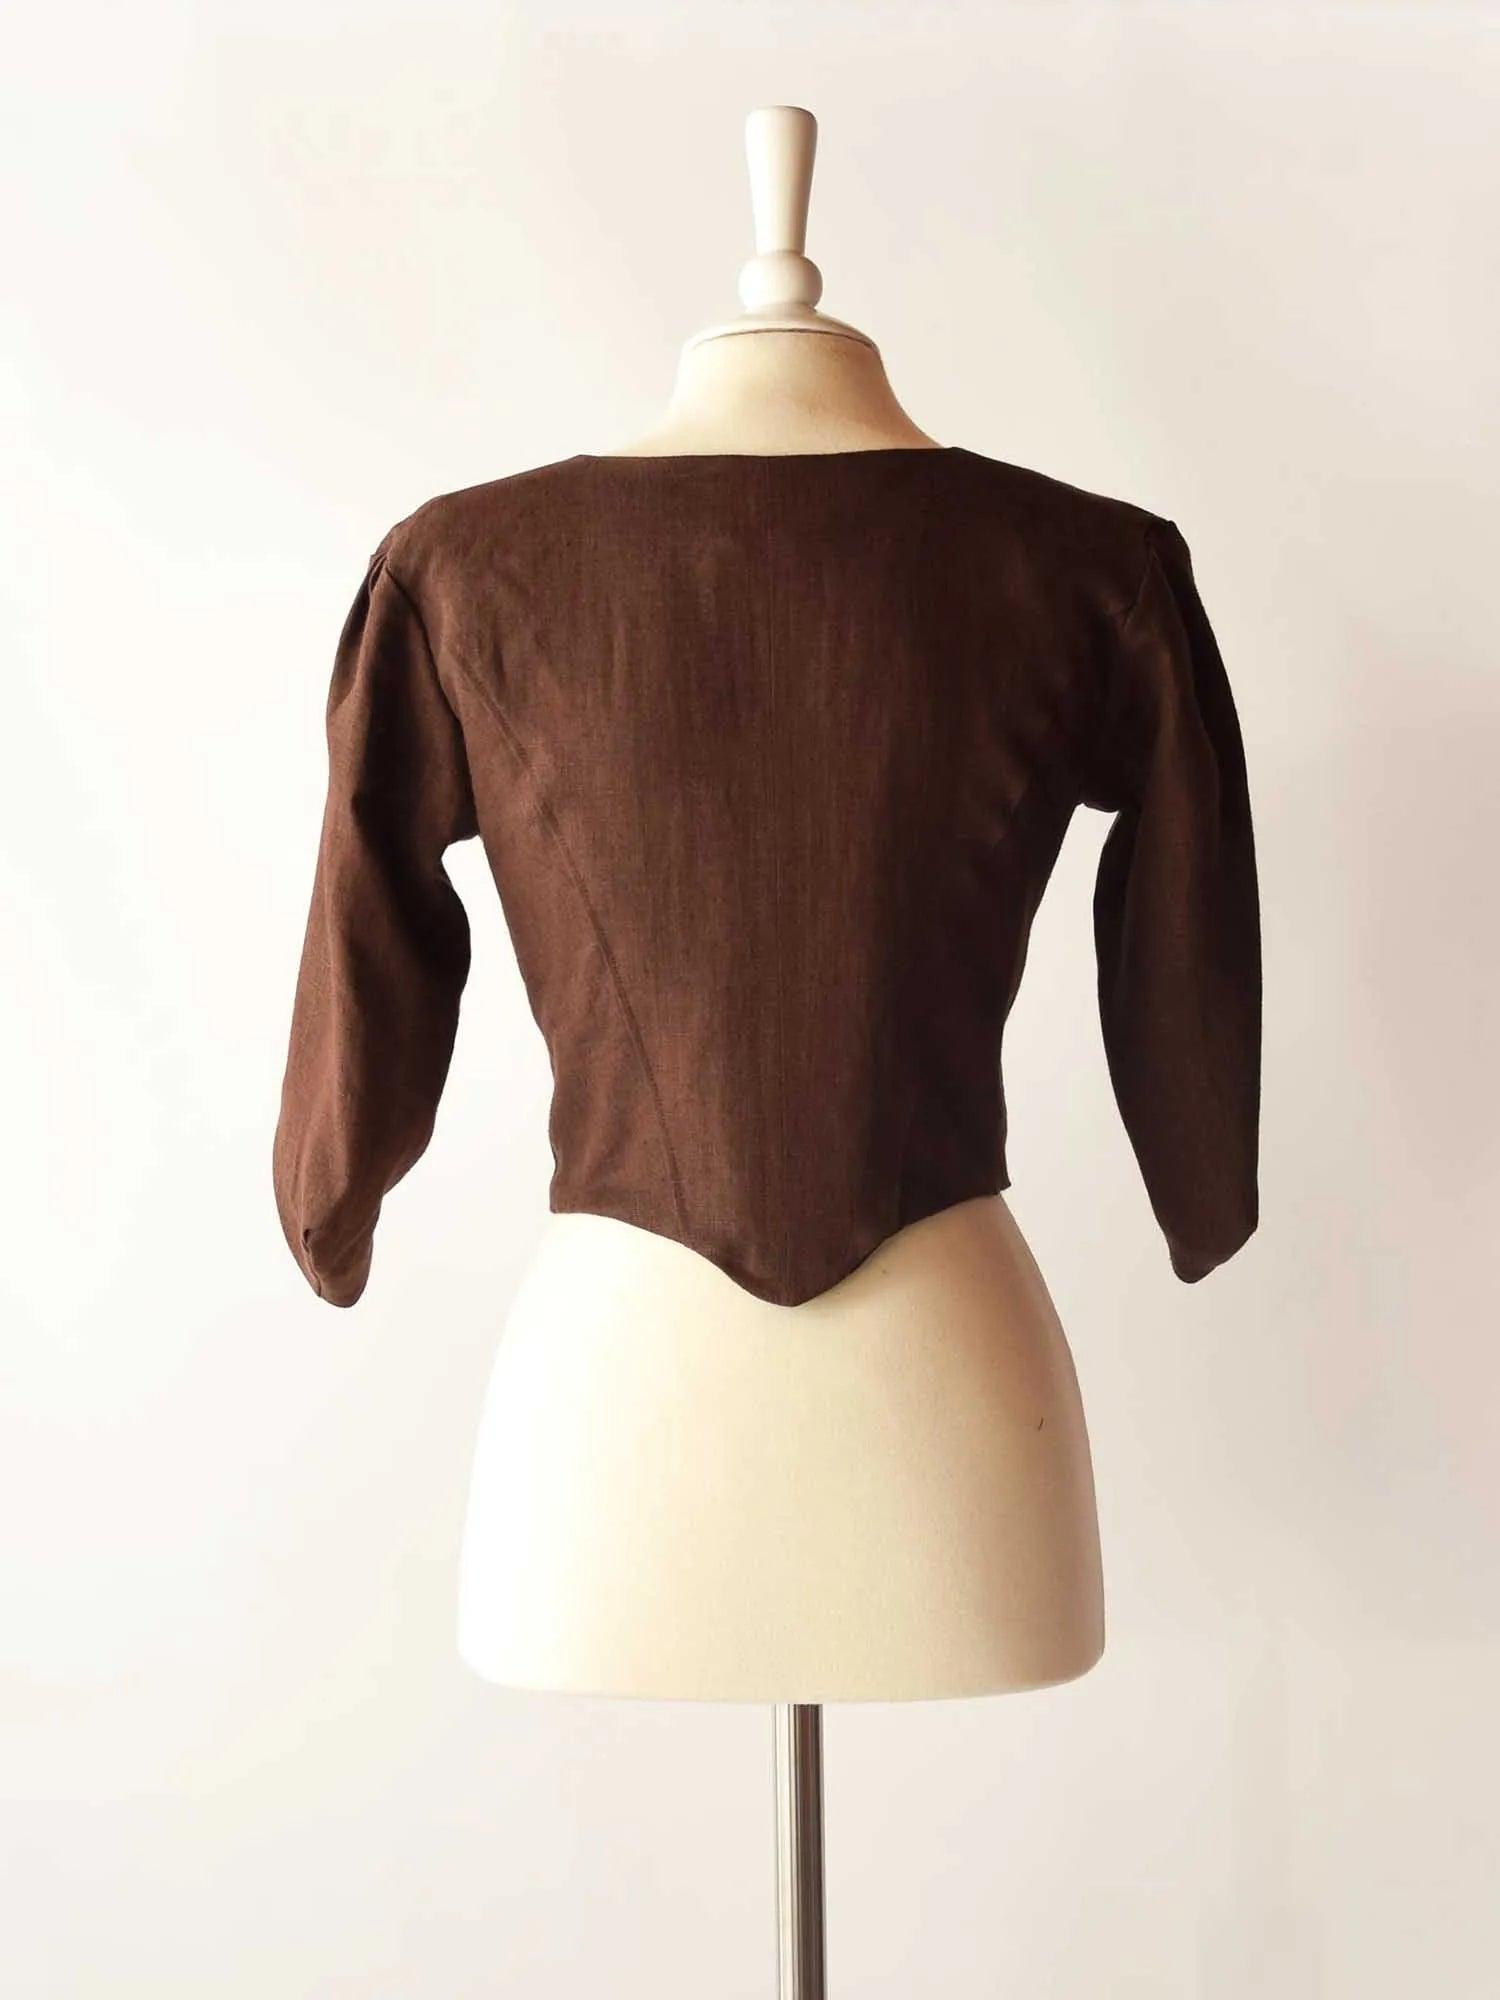 Lace Up Bodice in Chocolate Linen - Atelier Serraspina